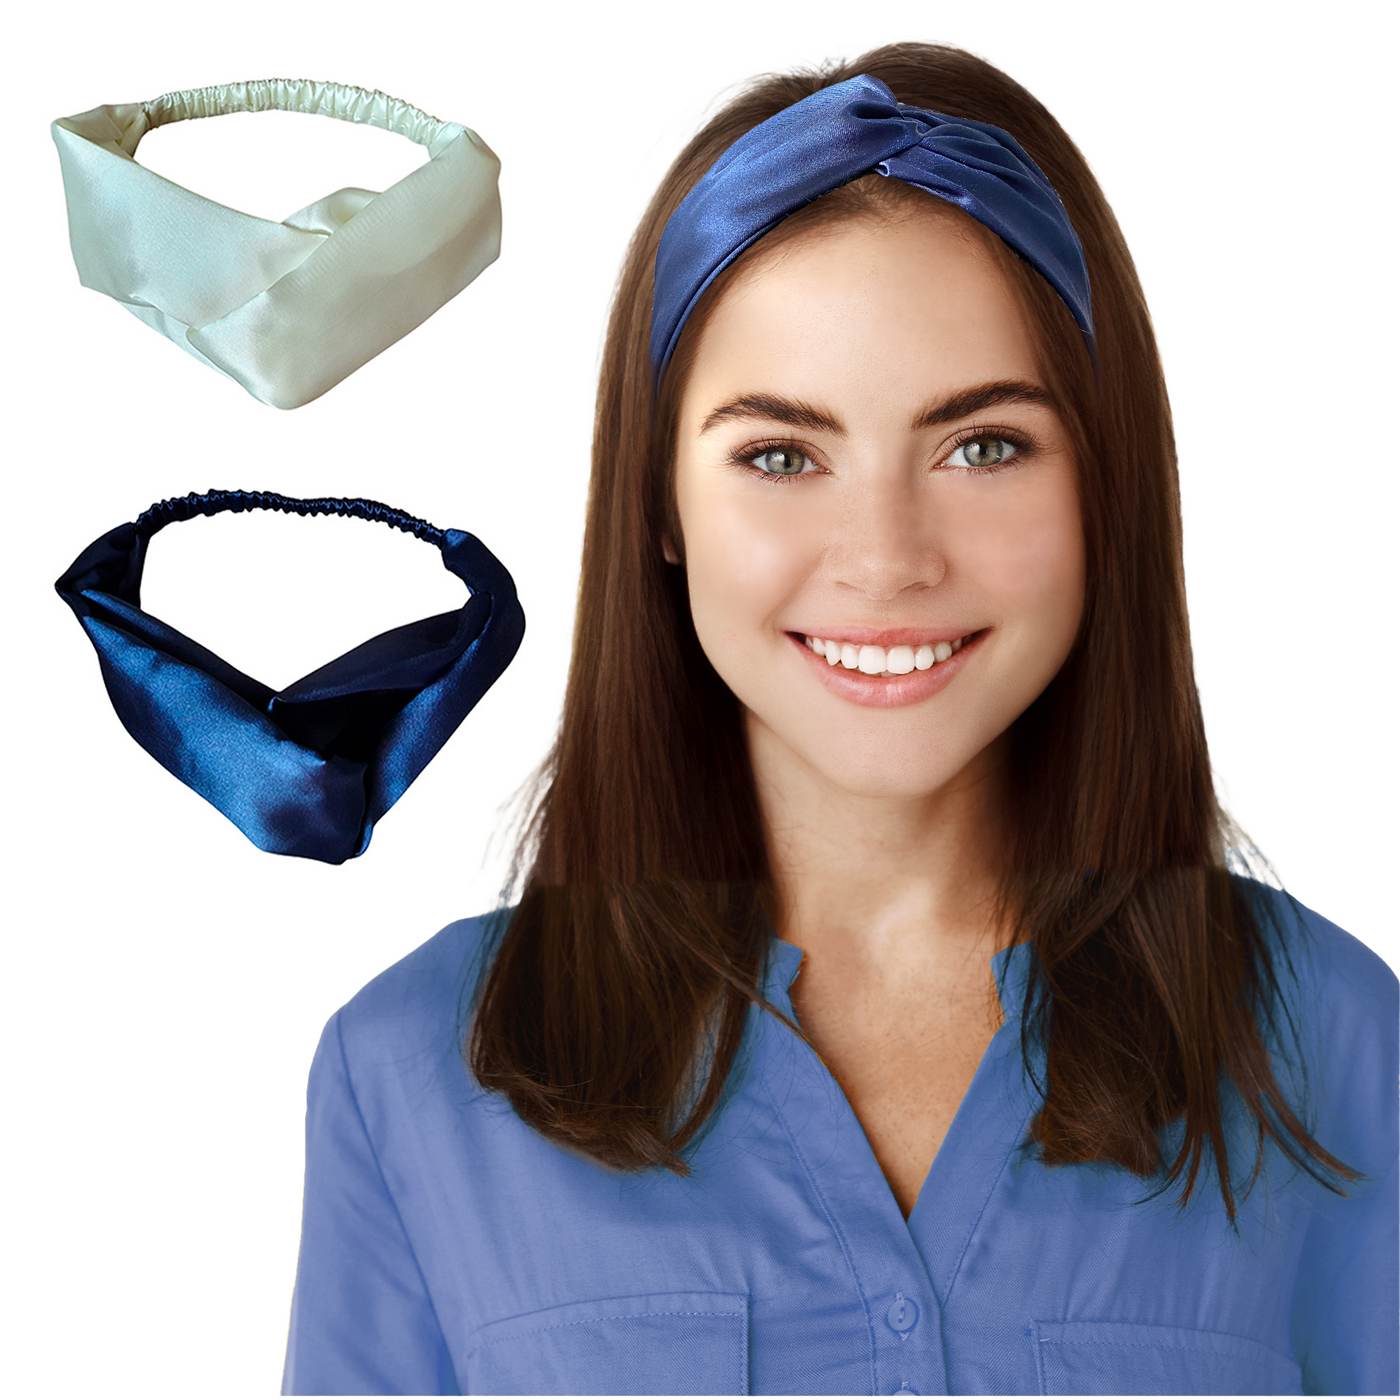 2 Satin Hairbands For Women - Solid Navy Ivory